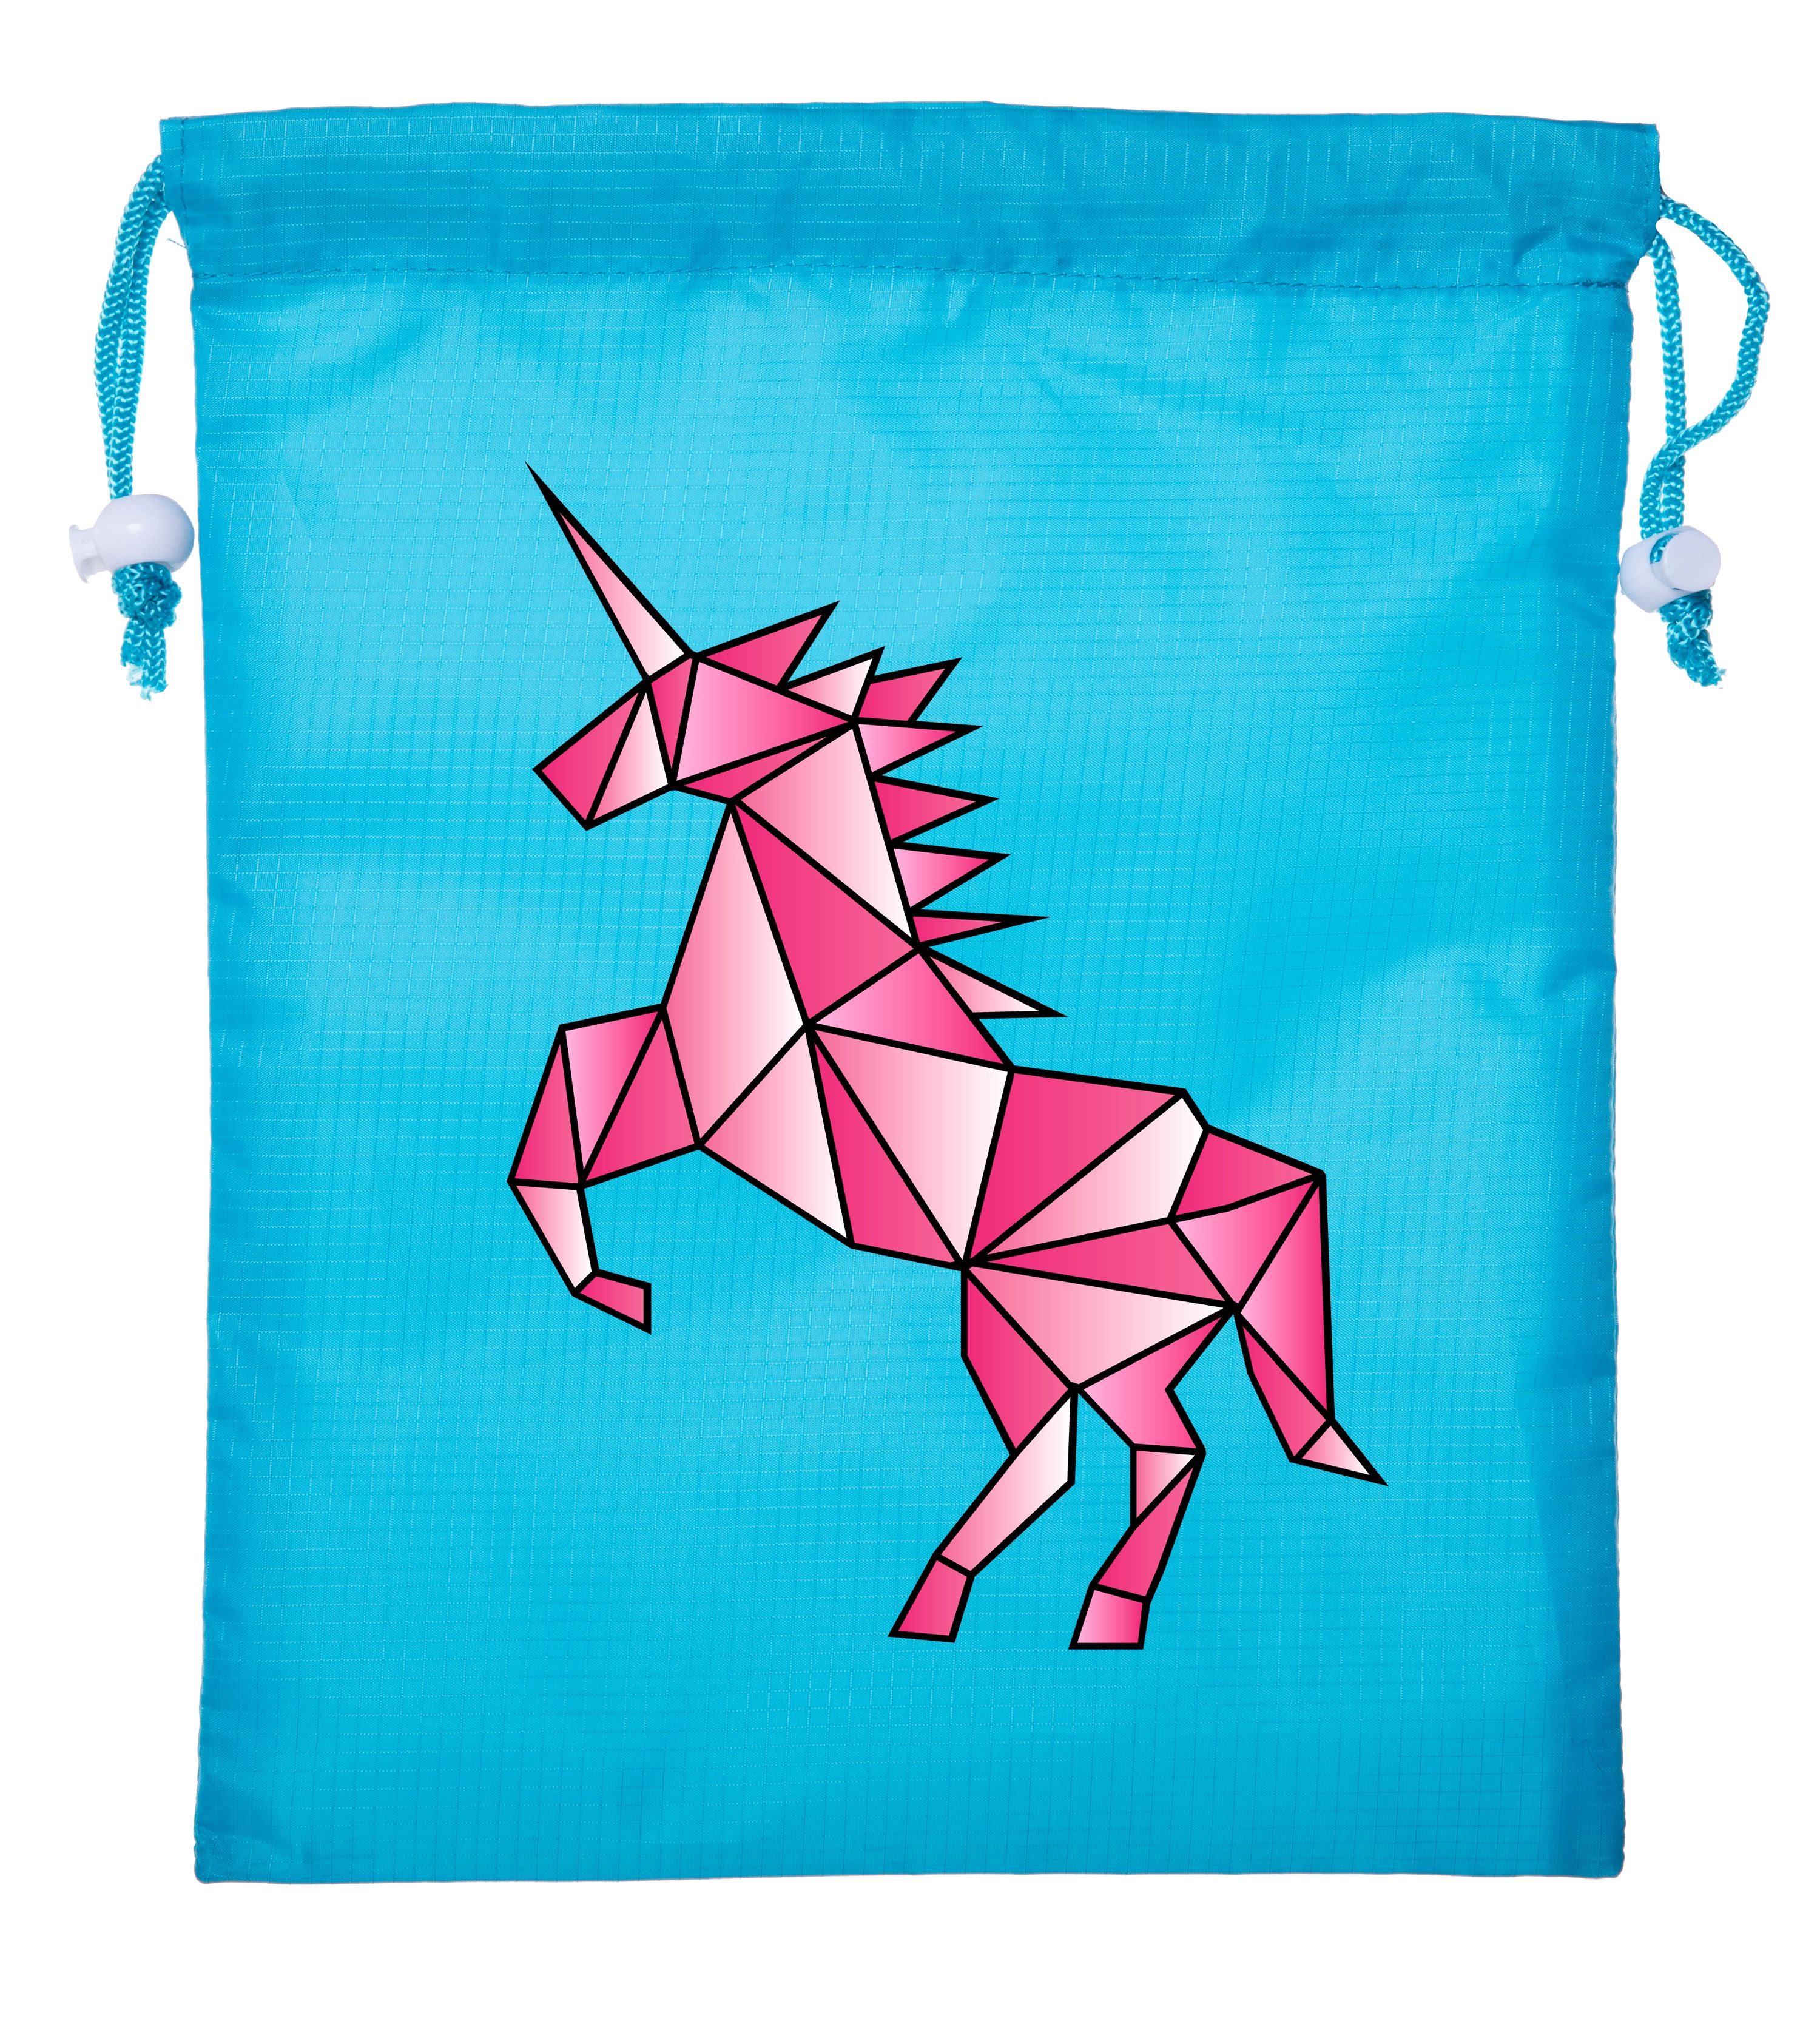 3-Dimensional Animal Bags, Mini Polygon Animal Favor bags, for School & Parties - image 2 of 2